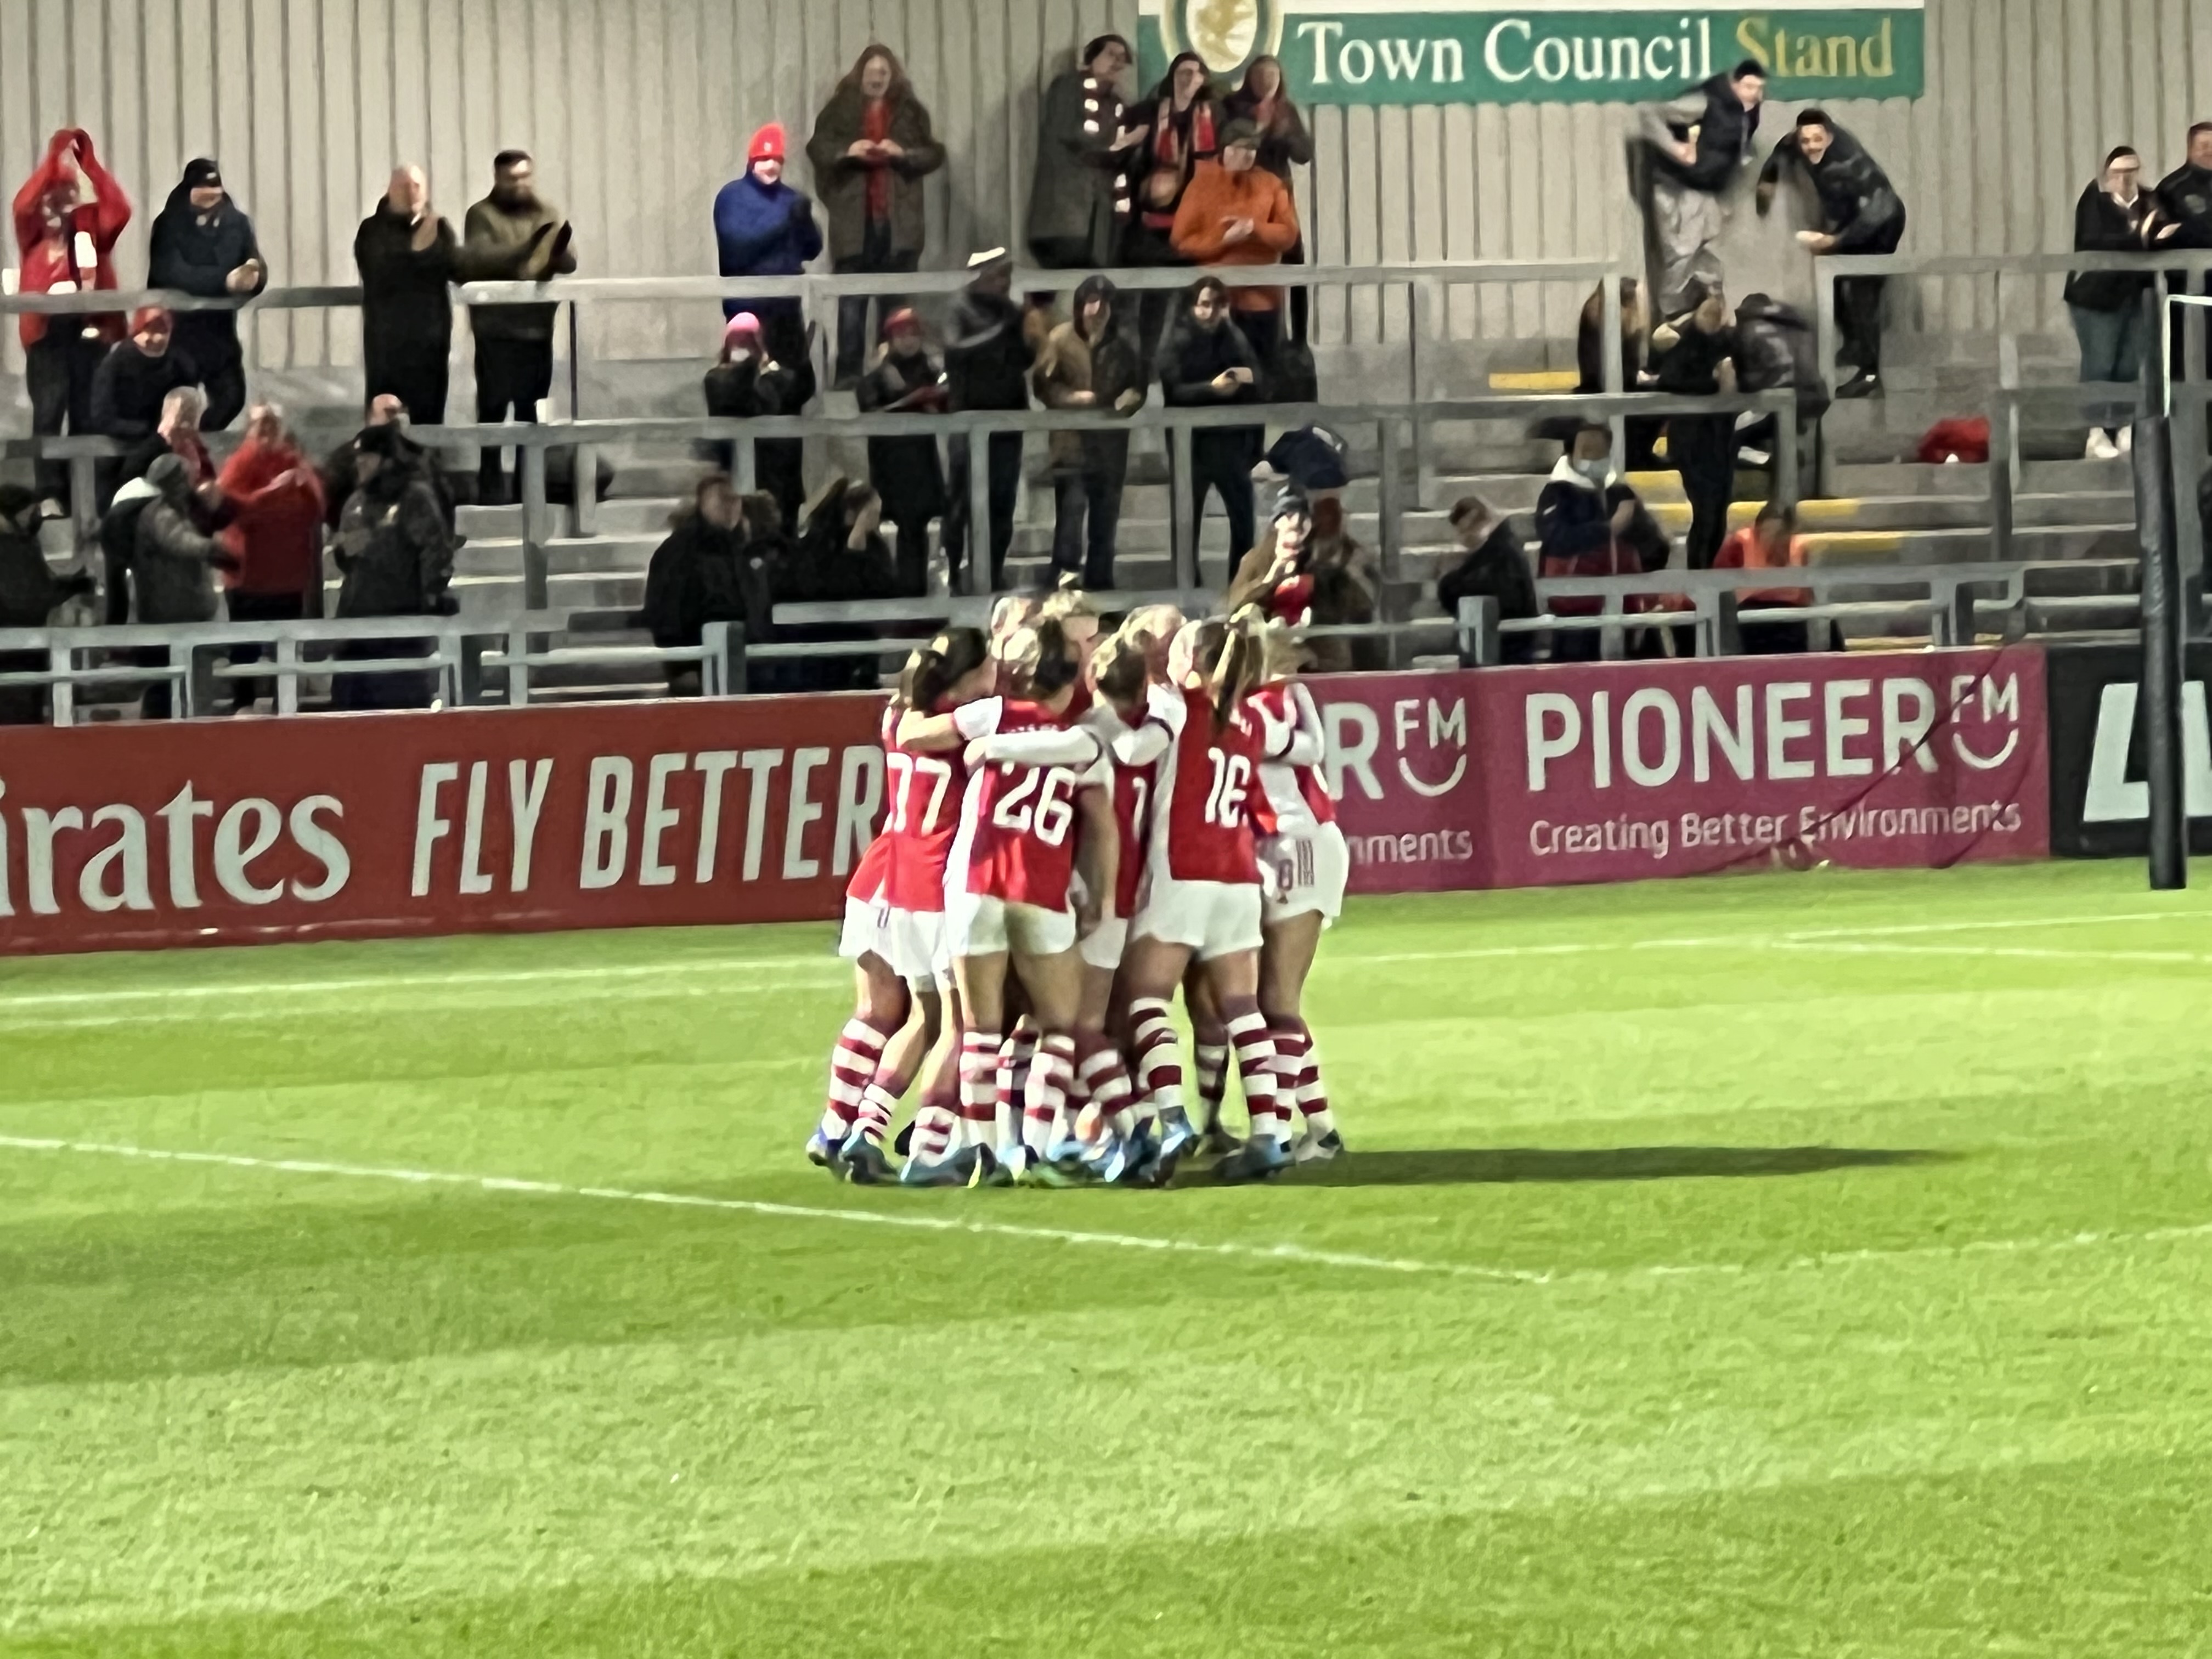 FA Cup Preview: Arsenal Women v London City Lionesses at Meadow Park